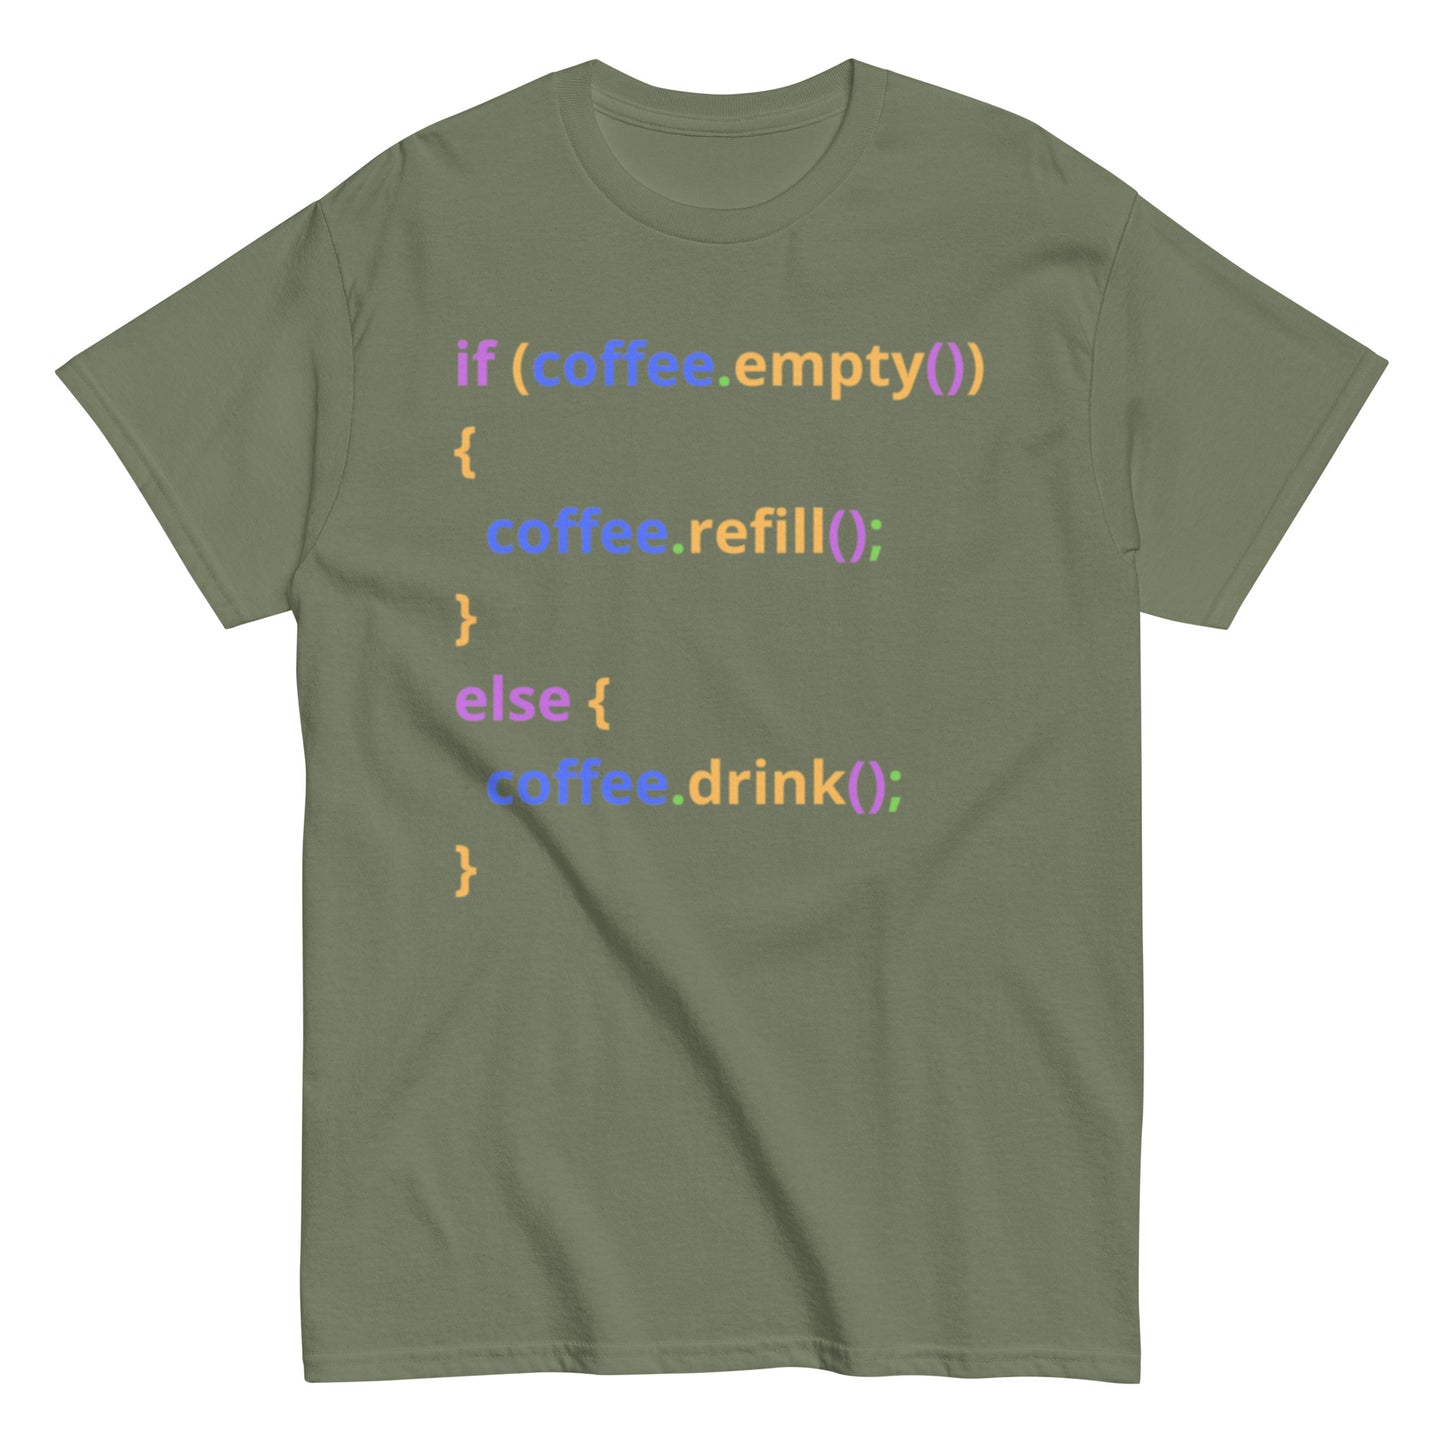 Code & Coffee Men's Classic Tee: JavaScript Snippet for Coffee Lovers